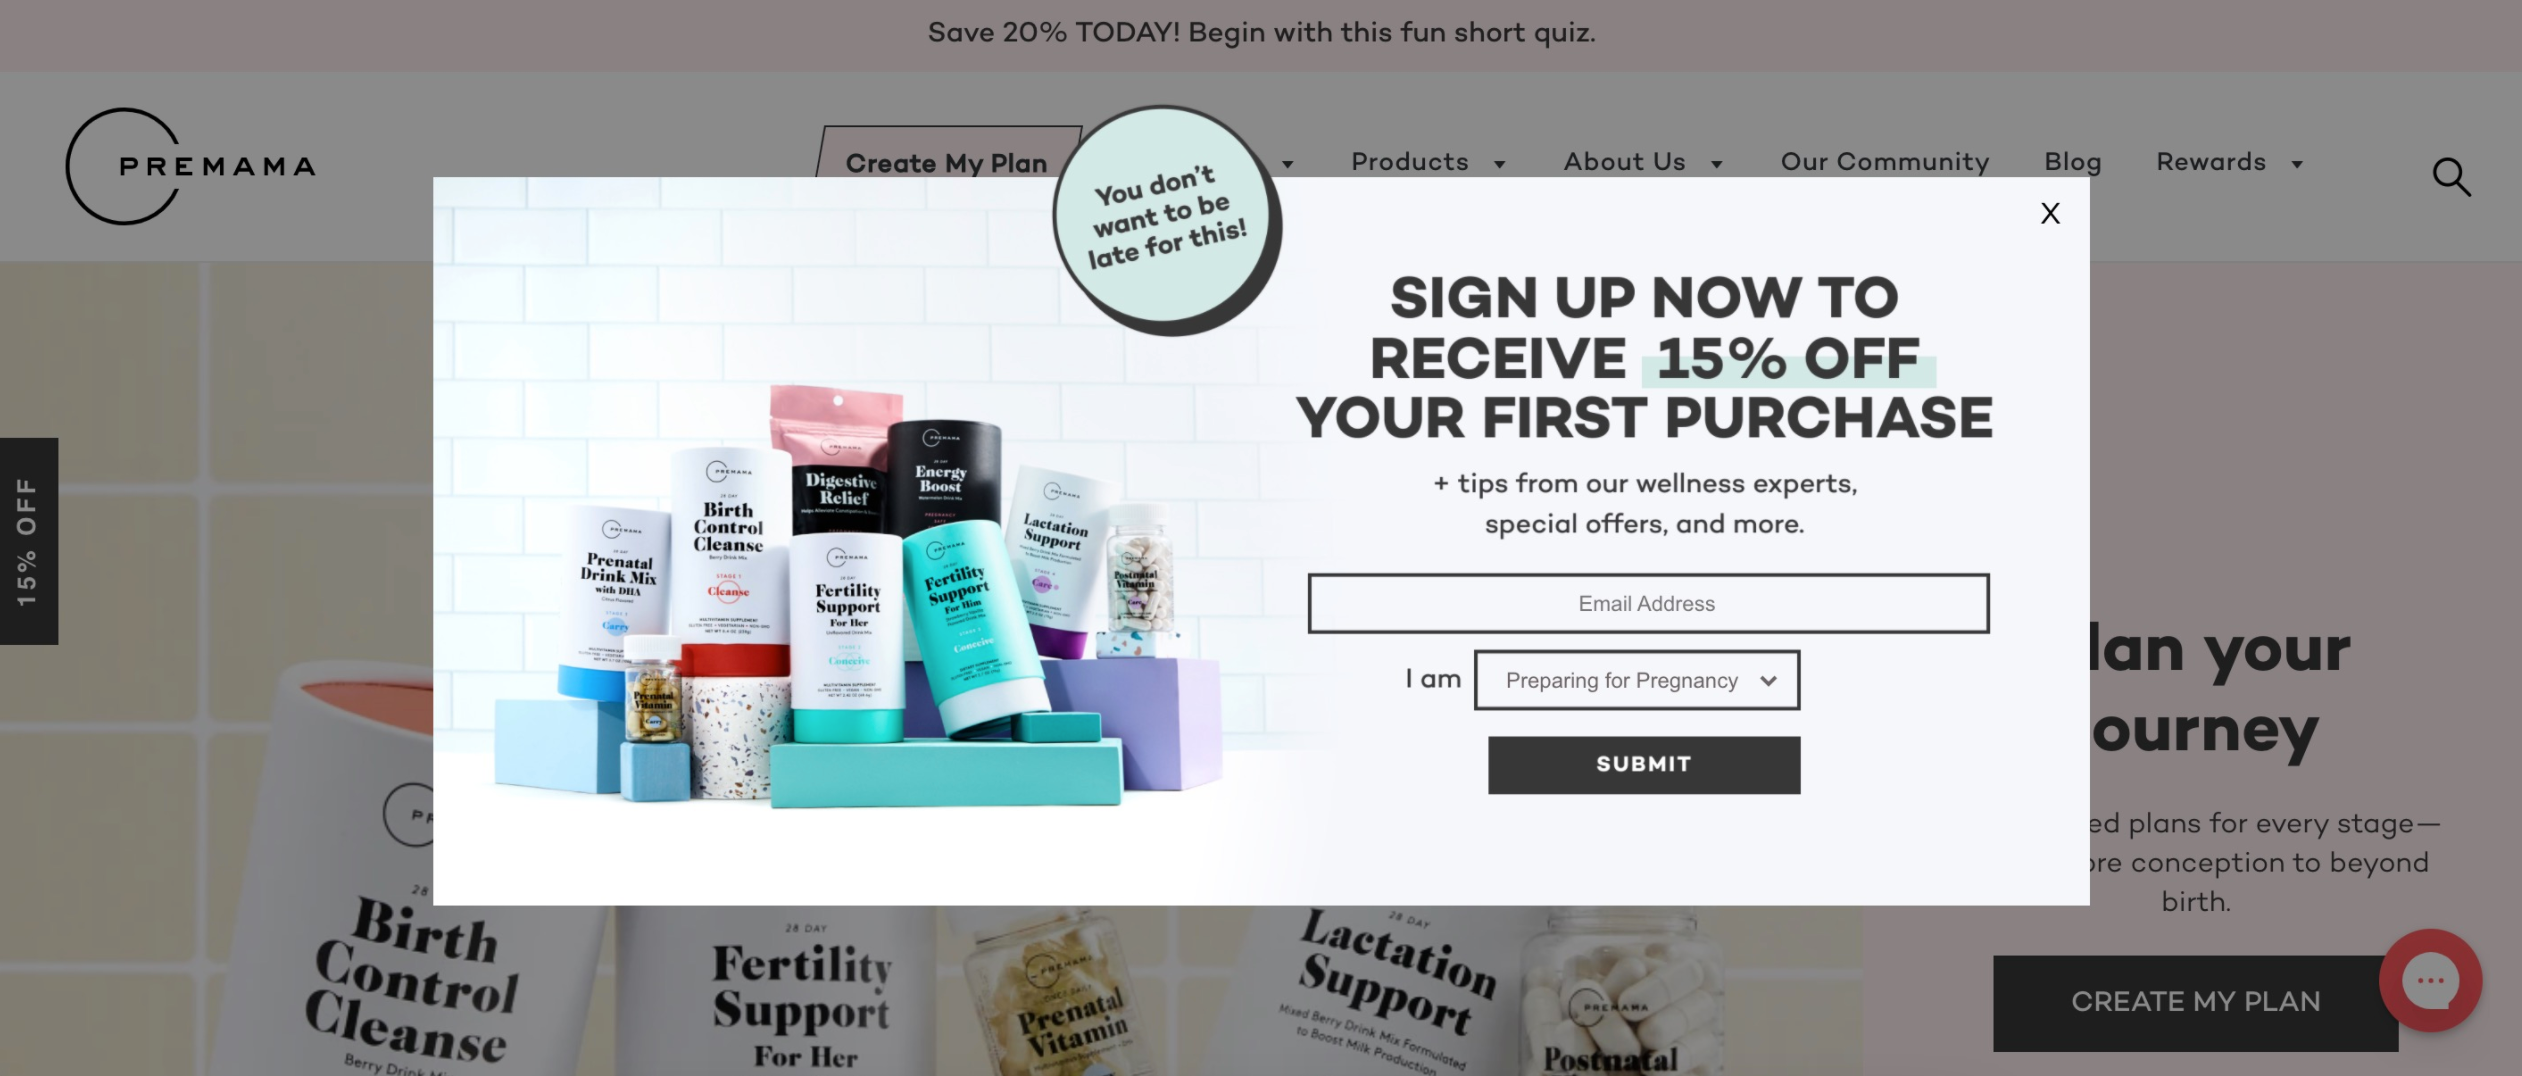 Pop-up from premama offering 15% off for customers who share their email